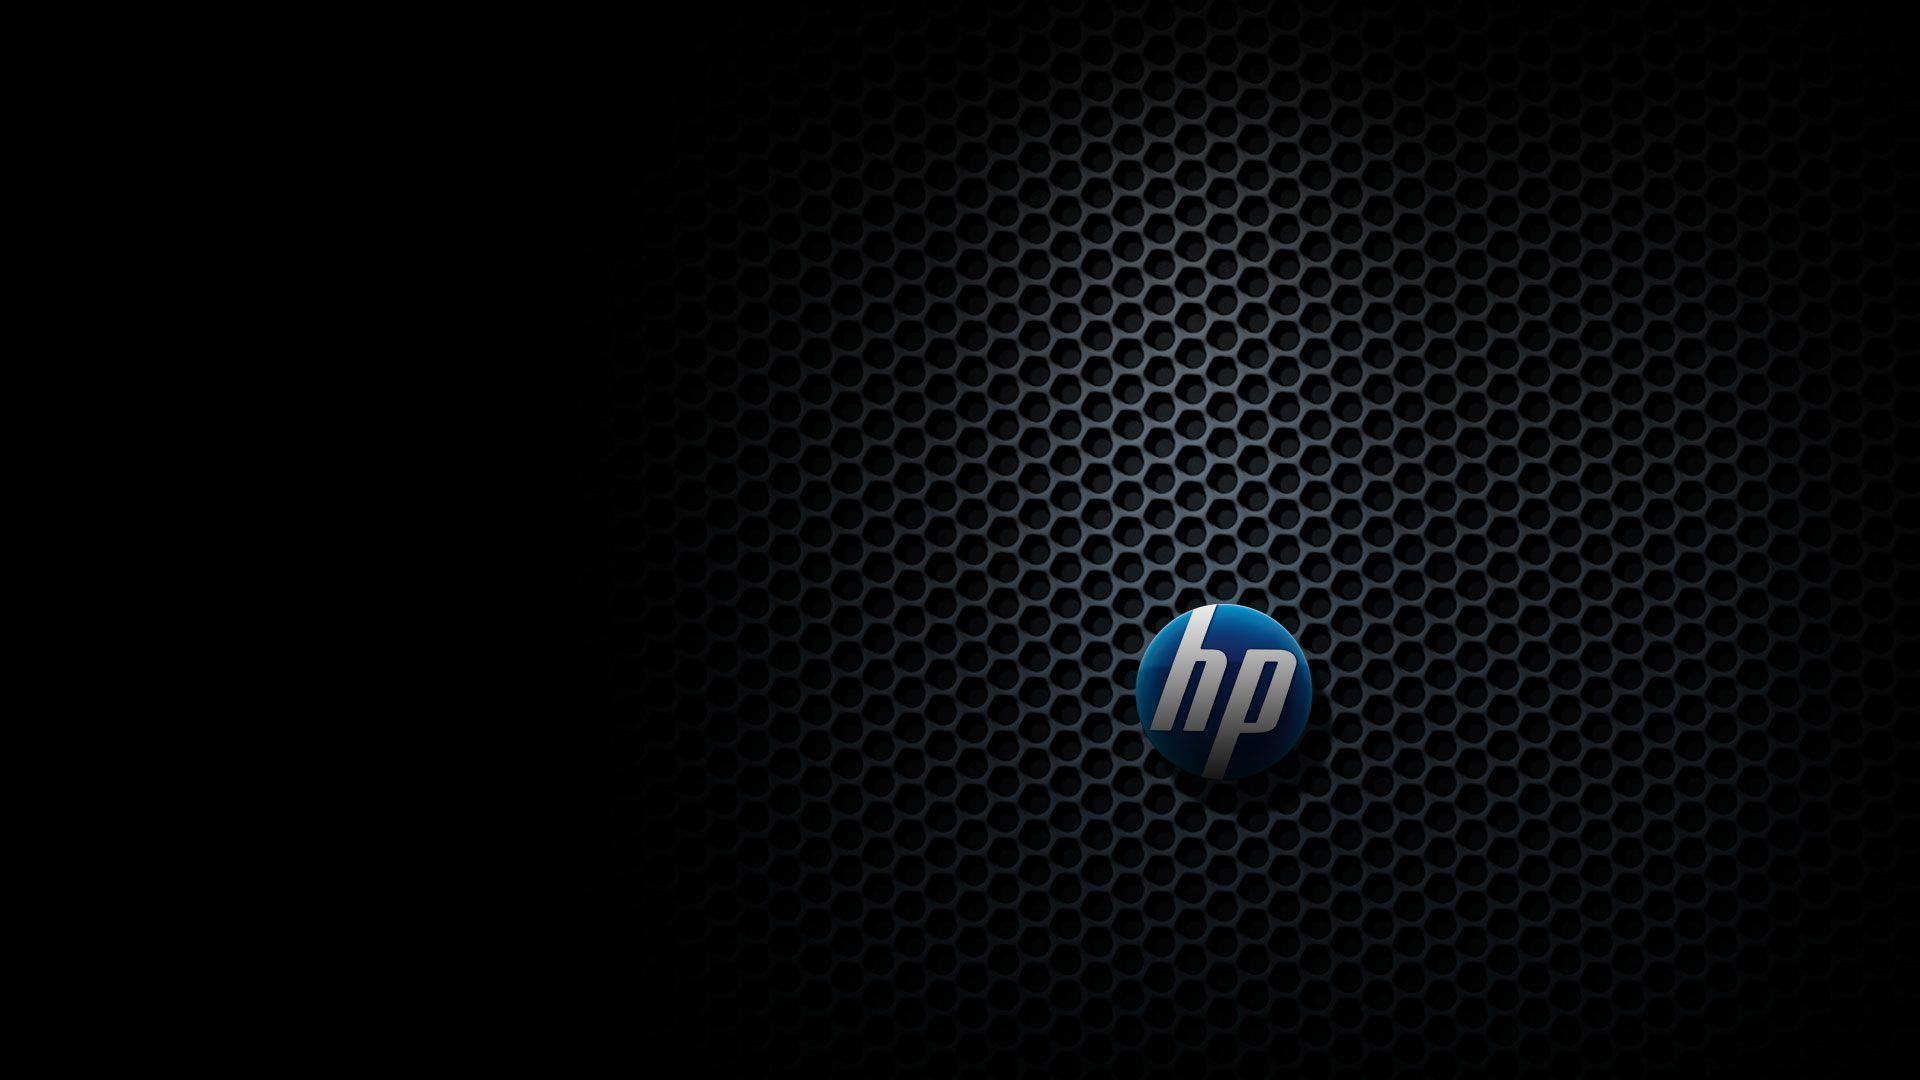 Wallpaper For > HD Wallpaper For Lapx1080 Hp